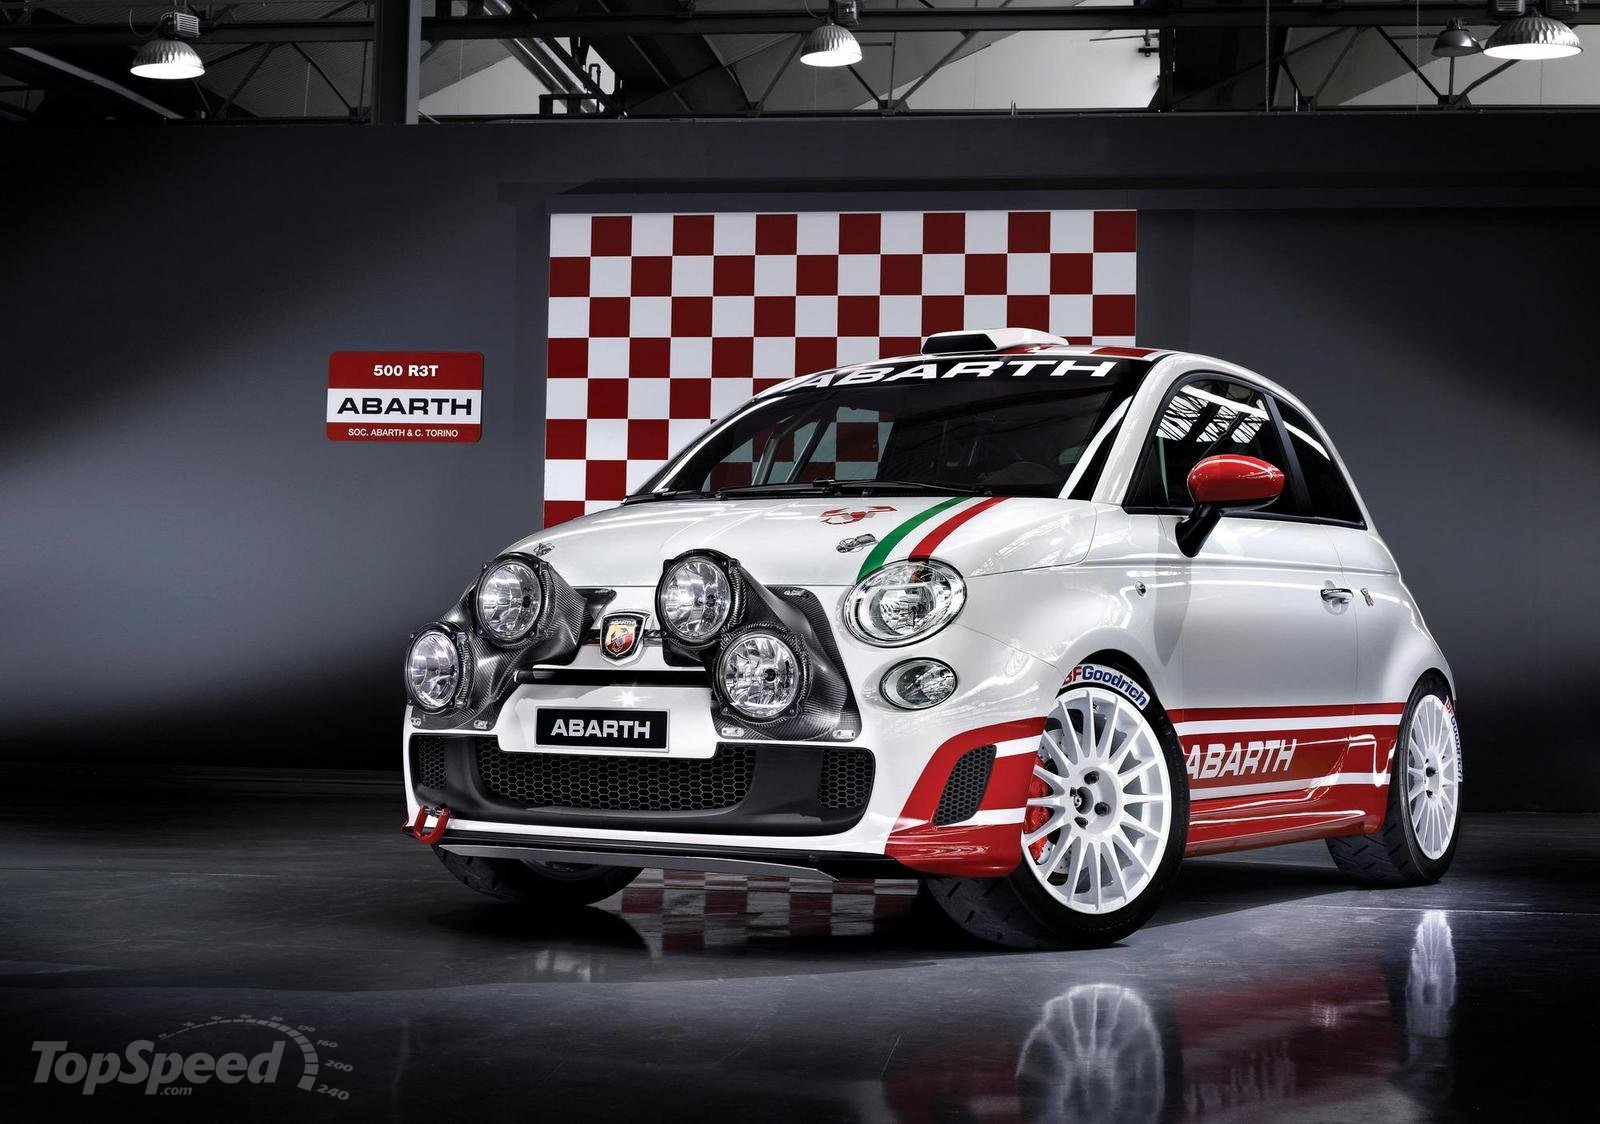 Popular Fiat 500 Abarth Image for Phone